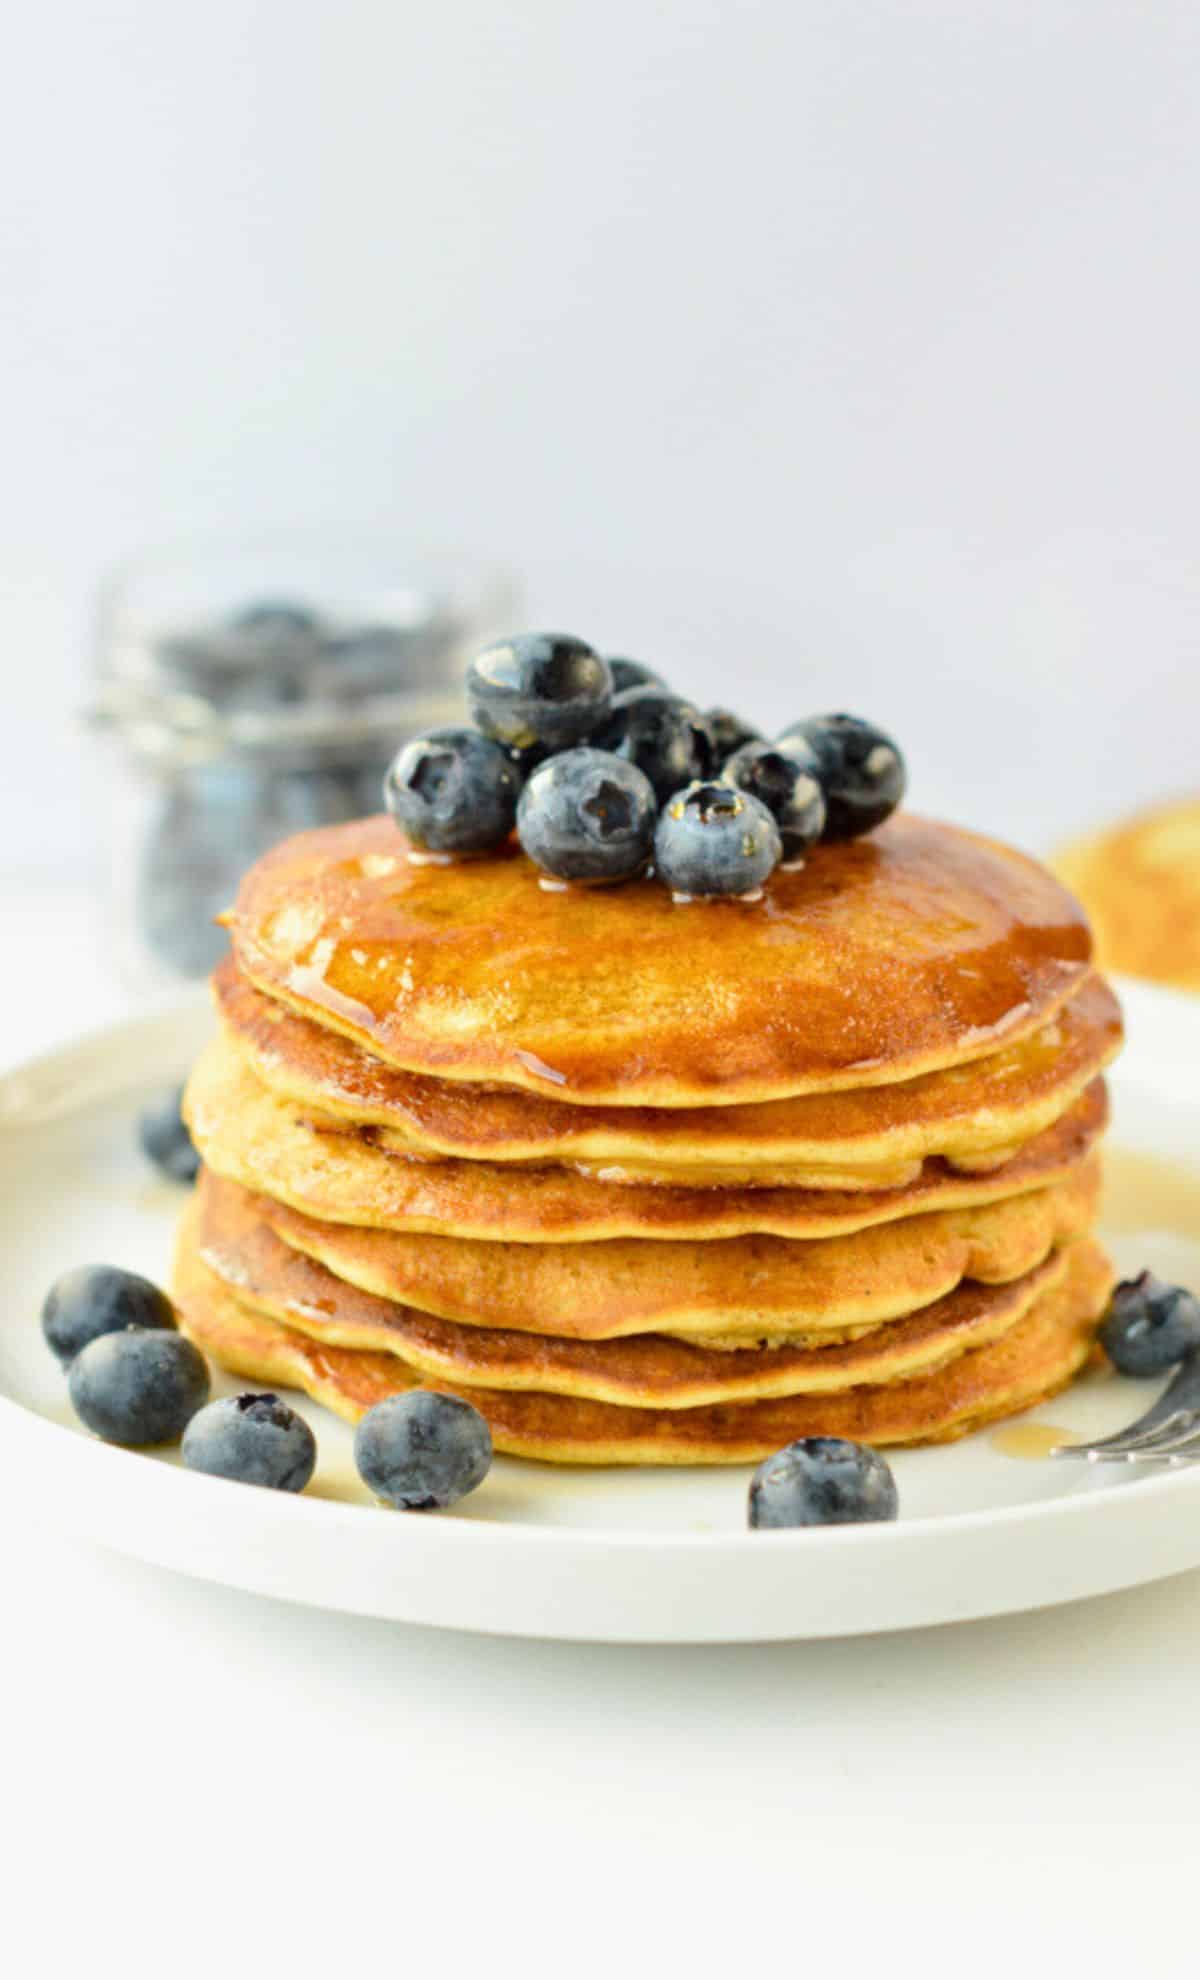 Vegan Chickpea Pancakes decorated with maple syrup and blueberries